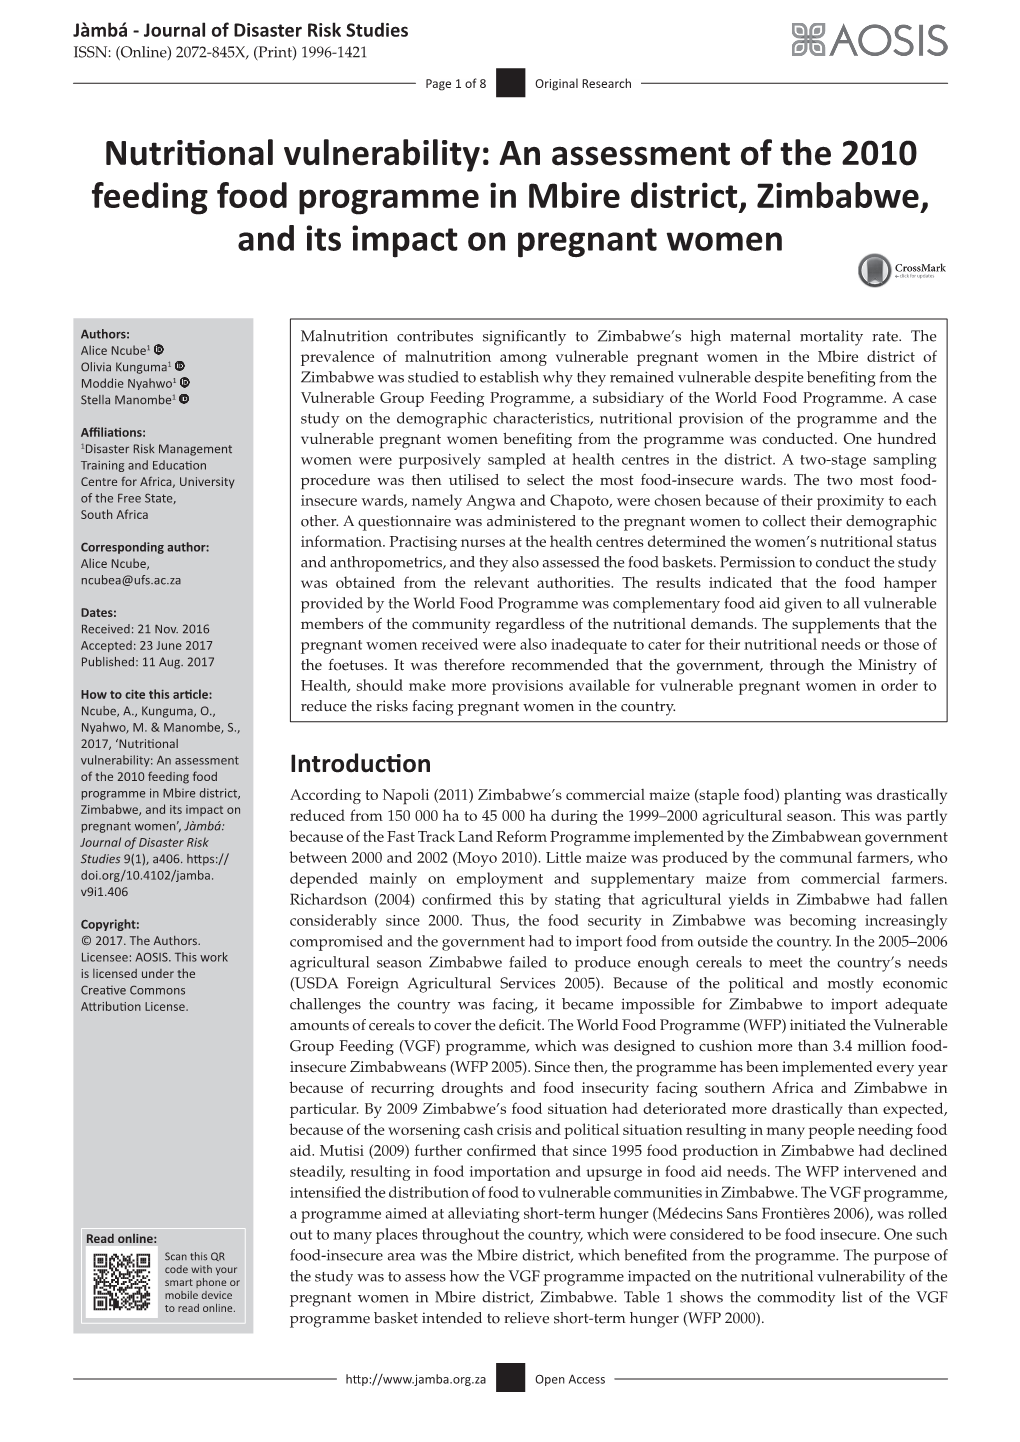 An Assessment of the 2010 Feeding Food Programme in Mbire District, Zimbabwe, and Its Impact on Pregnant Women